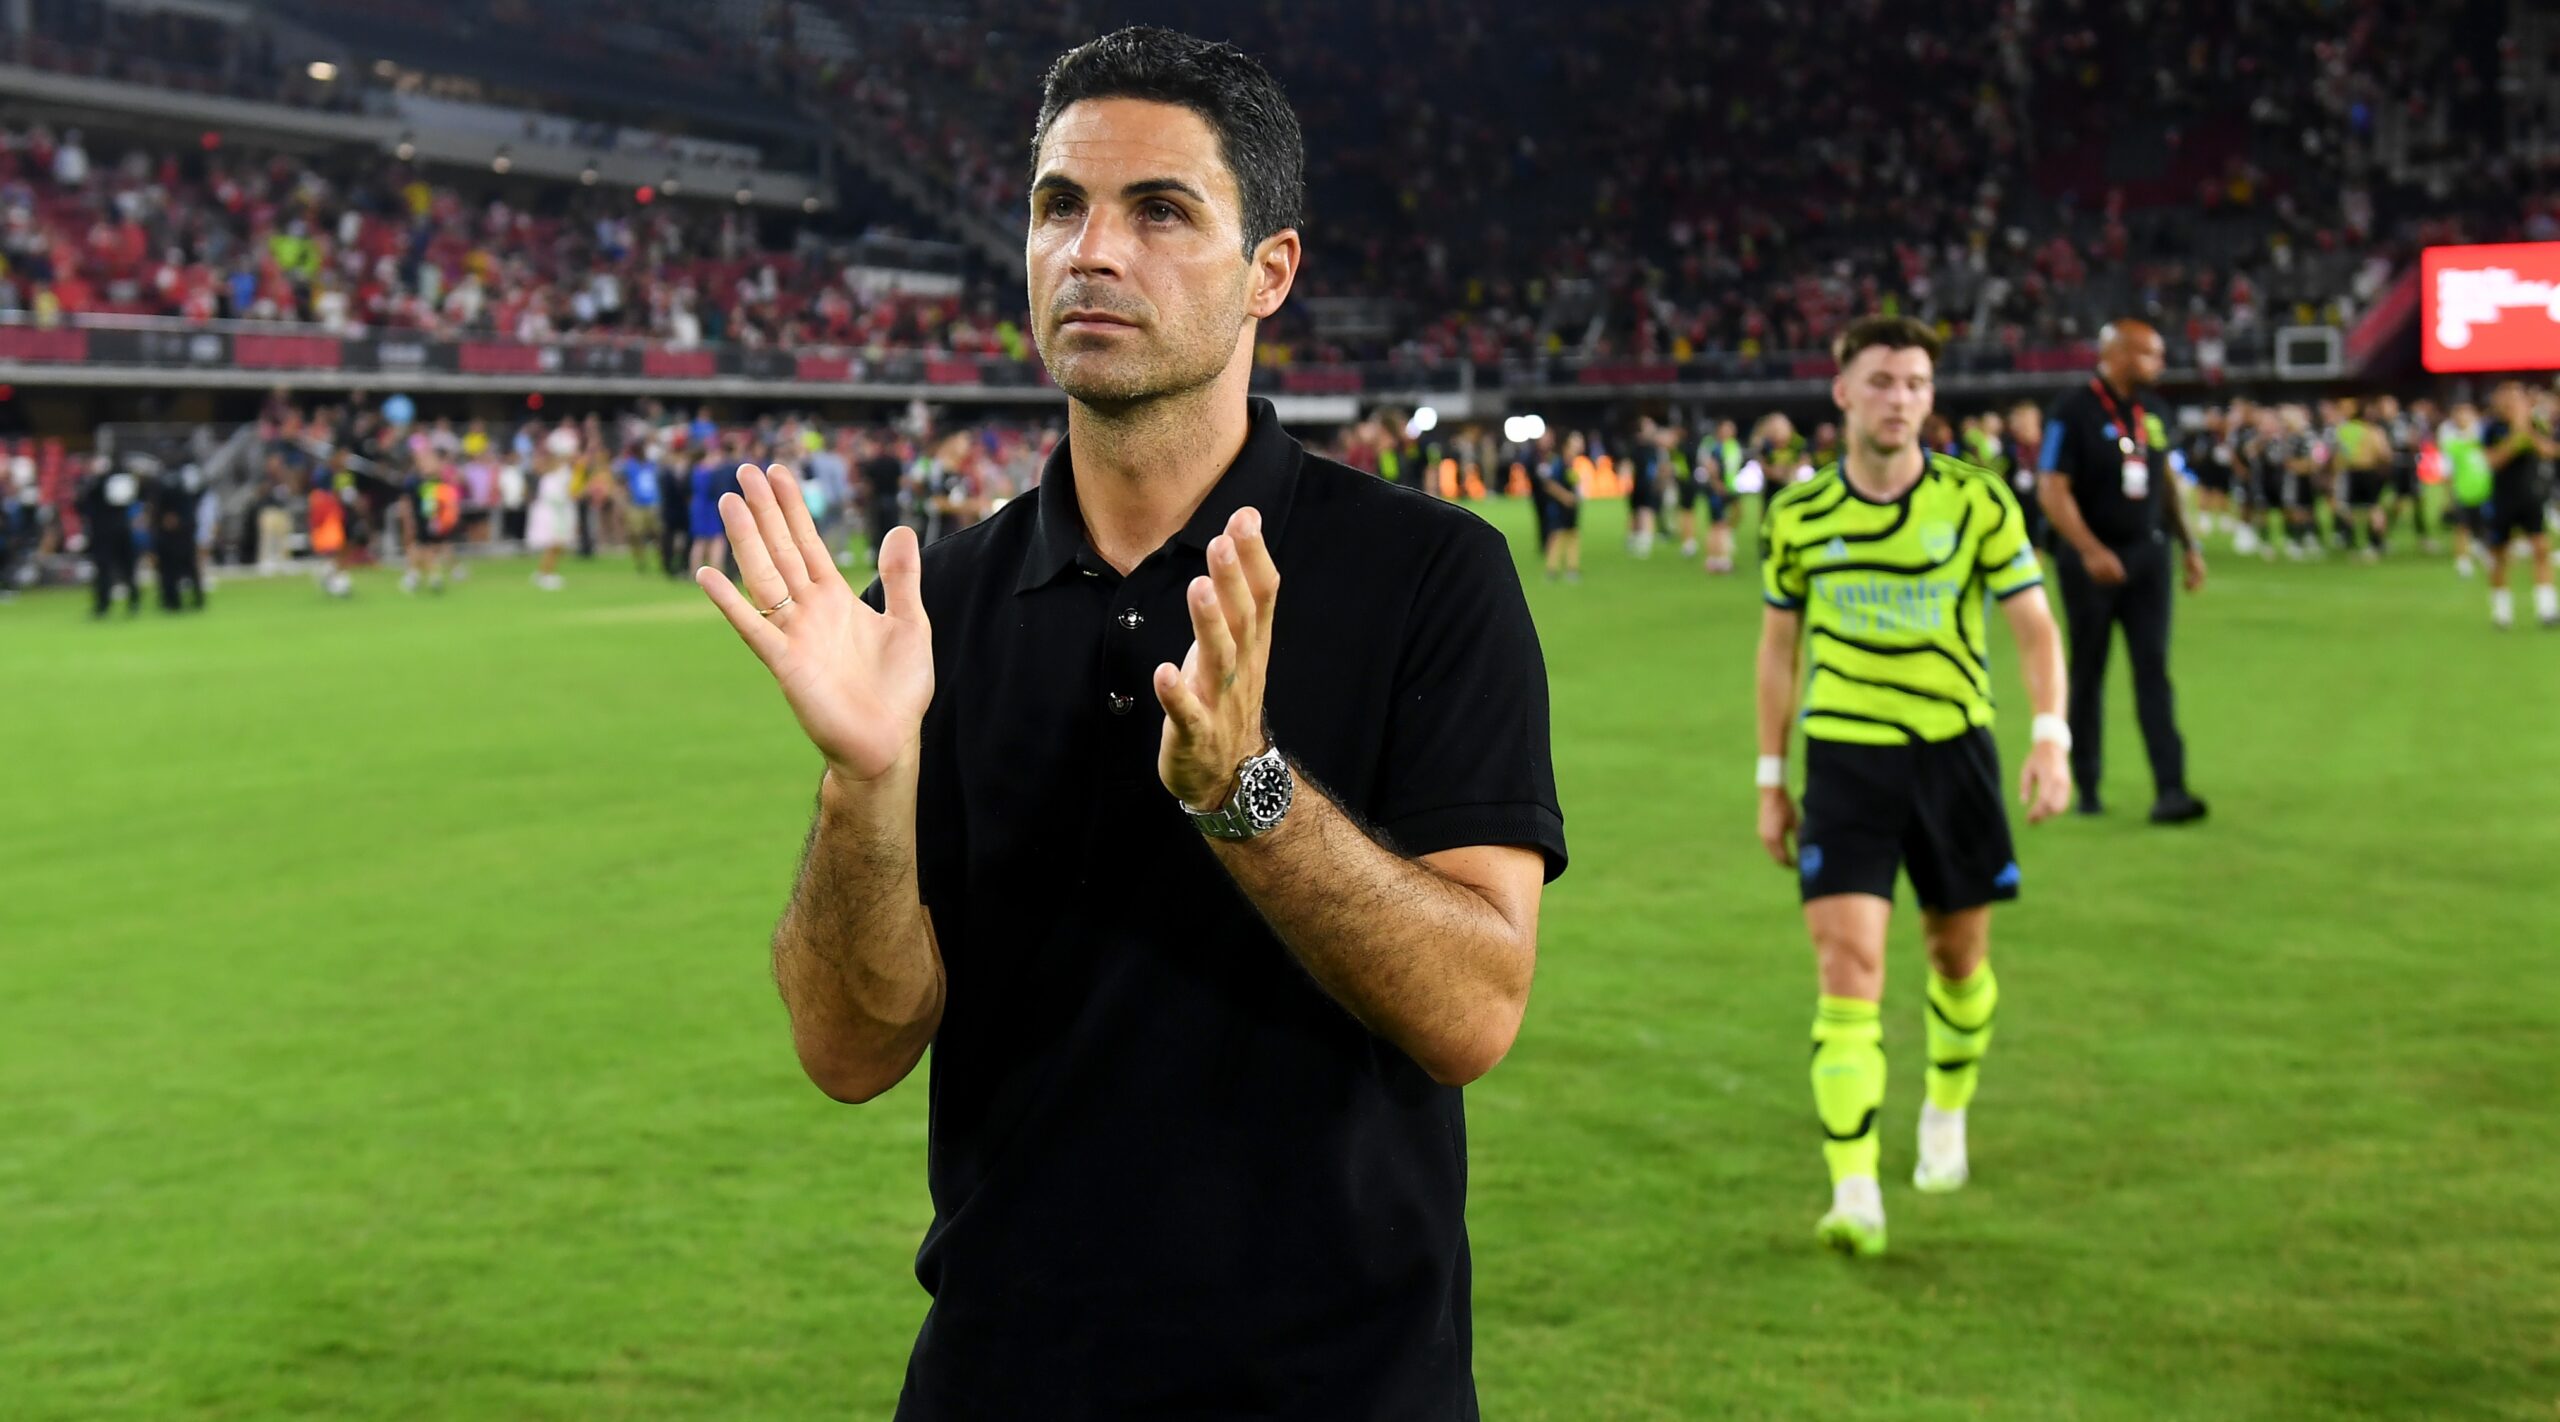 Arsenal boss Mikel Arteta drops HUGE hint about star's future amid transfer rumours